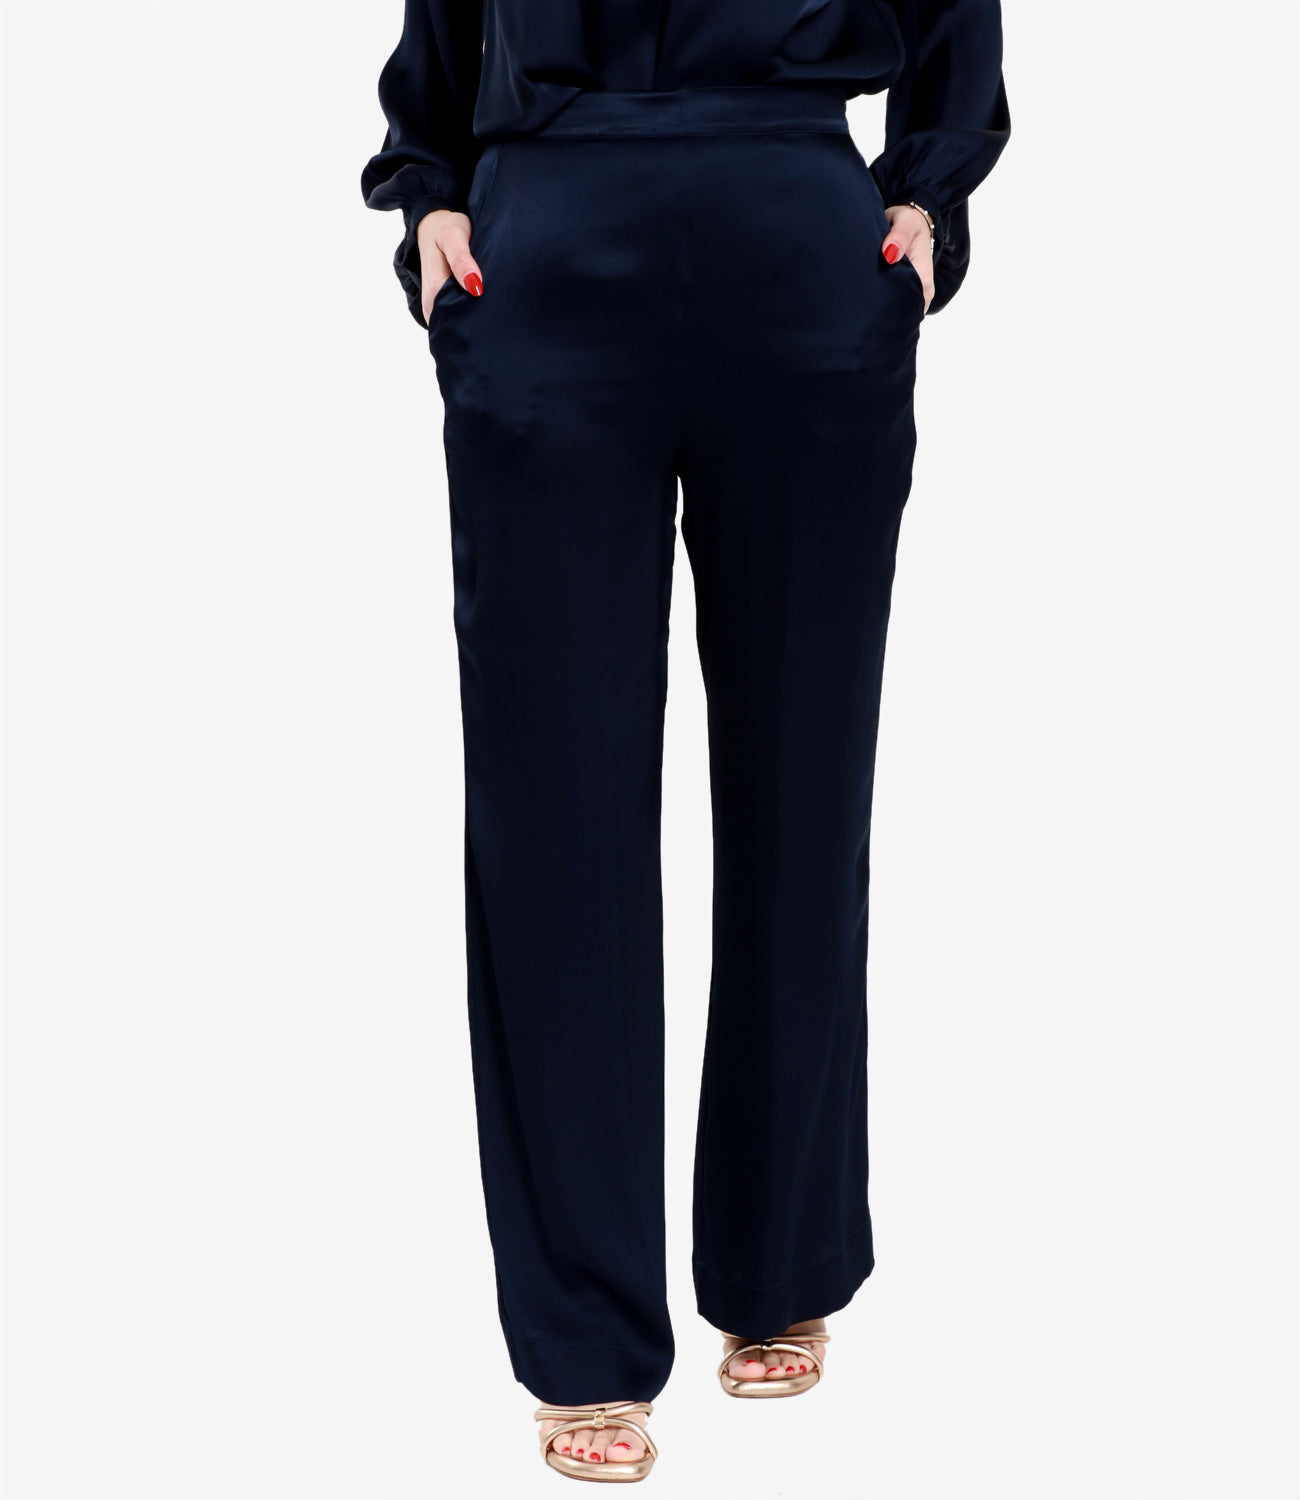 Semicouture | Emerson Night Blue Trousers